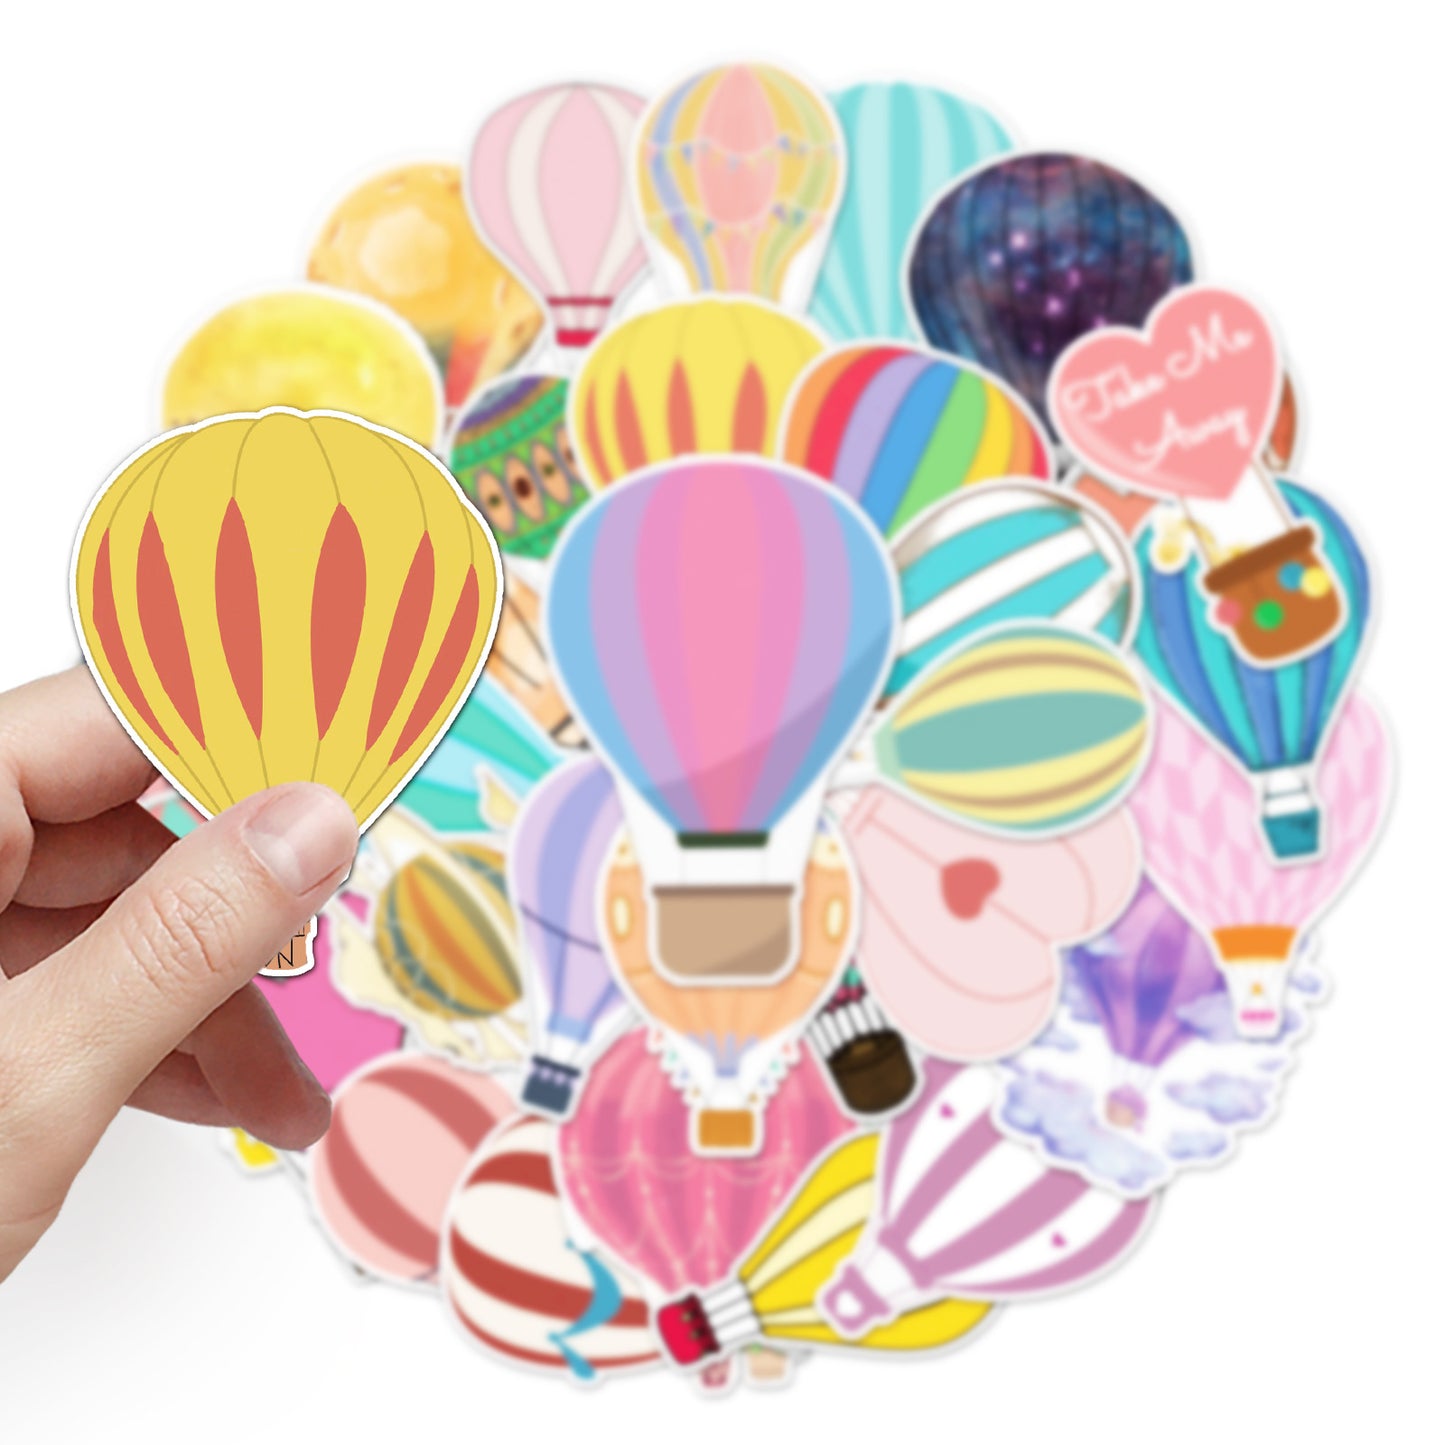 Flying Balloon Stickers 50pcs - 50 different stickers